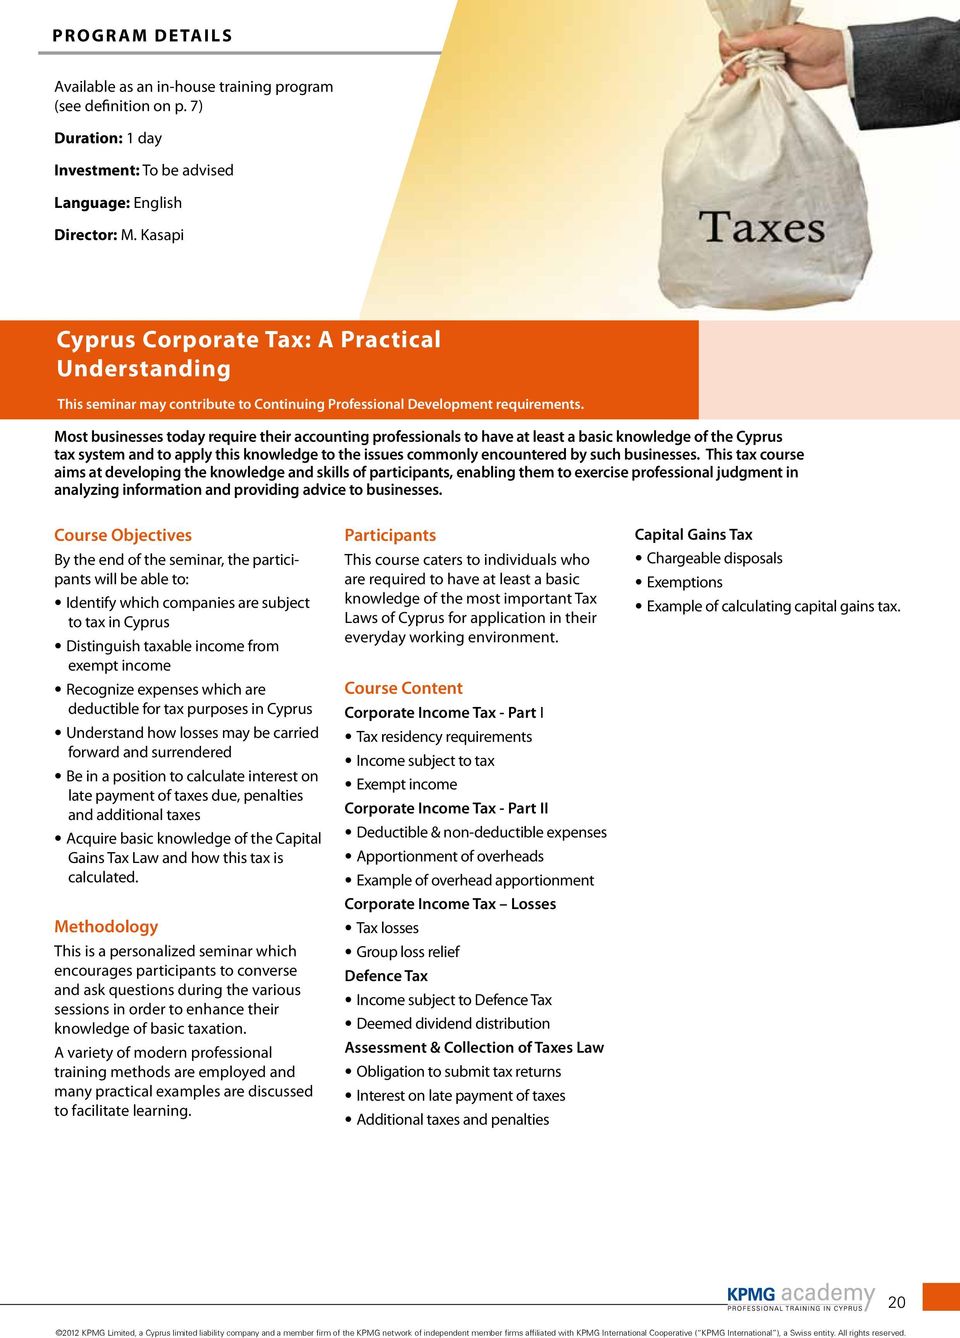 Most businesses today require their accounting professionals to have at least a basic knowledge of the Cyprus tax system and to apply this knowledge to the issues commonly encountered by such